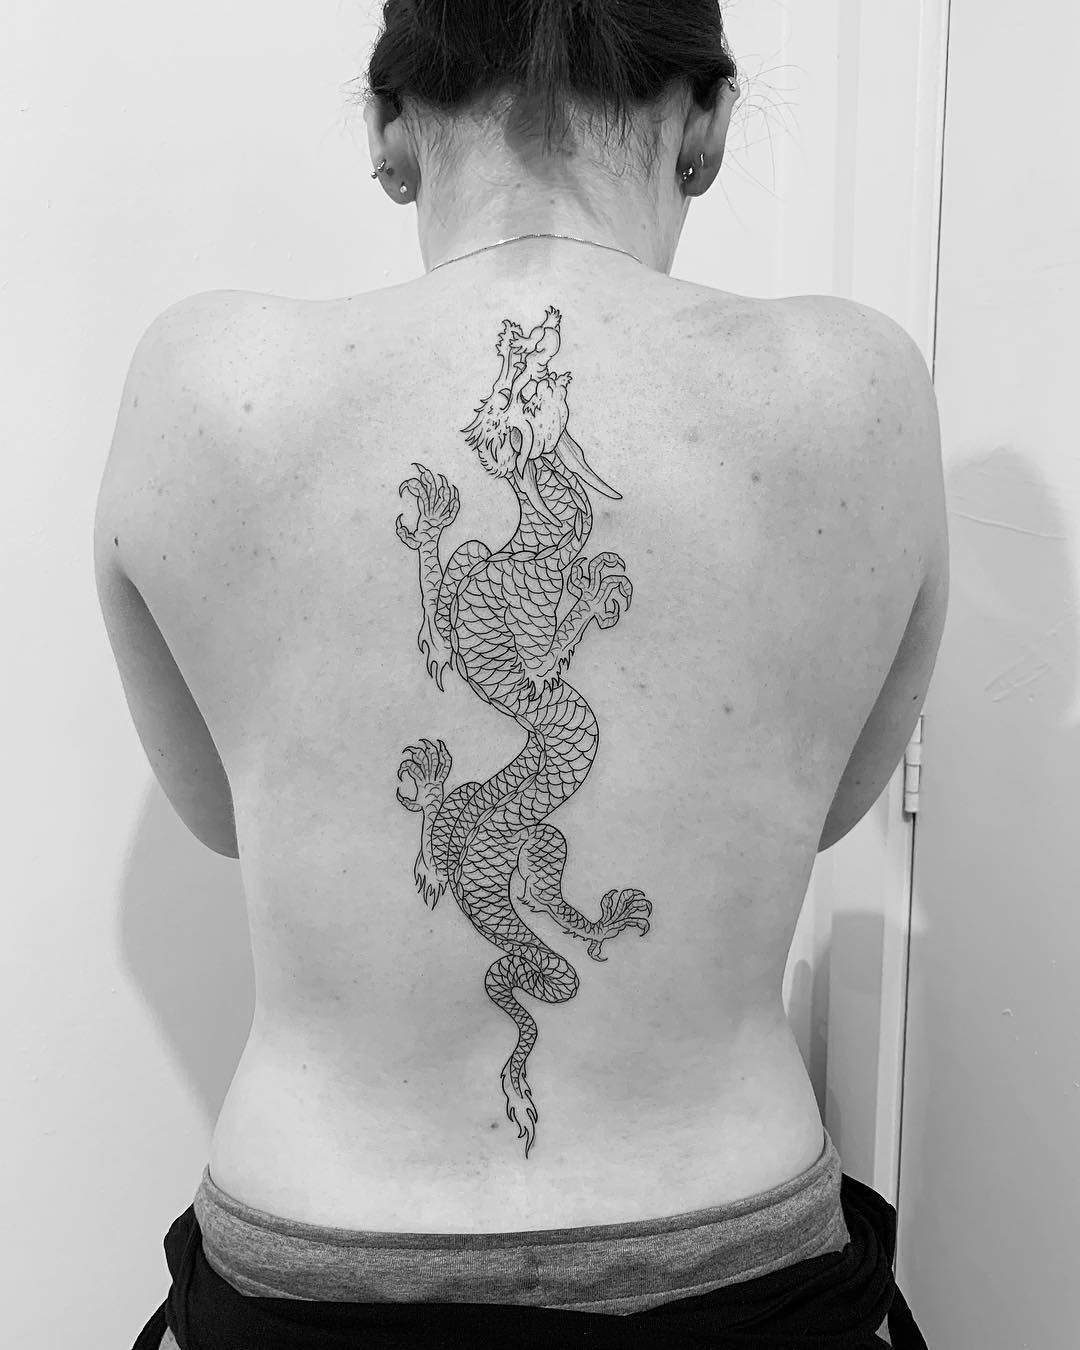 Fudo myoo dragon back tattoo almost completed one more tattoo sitting to  go  Custom Tattoo Artist Leeds